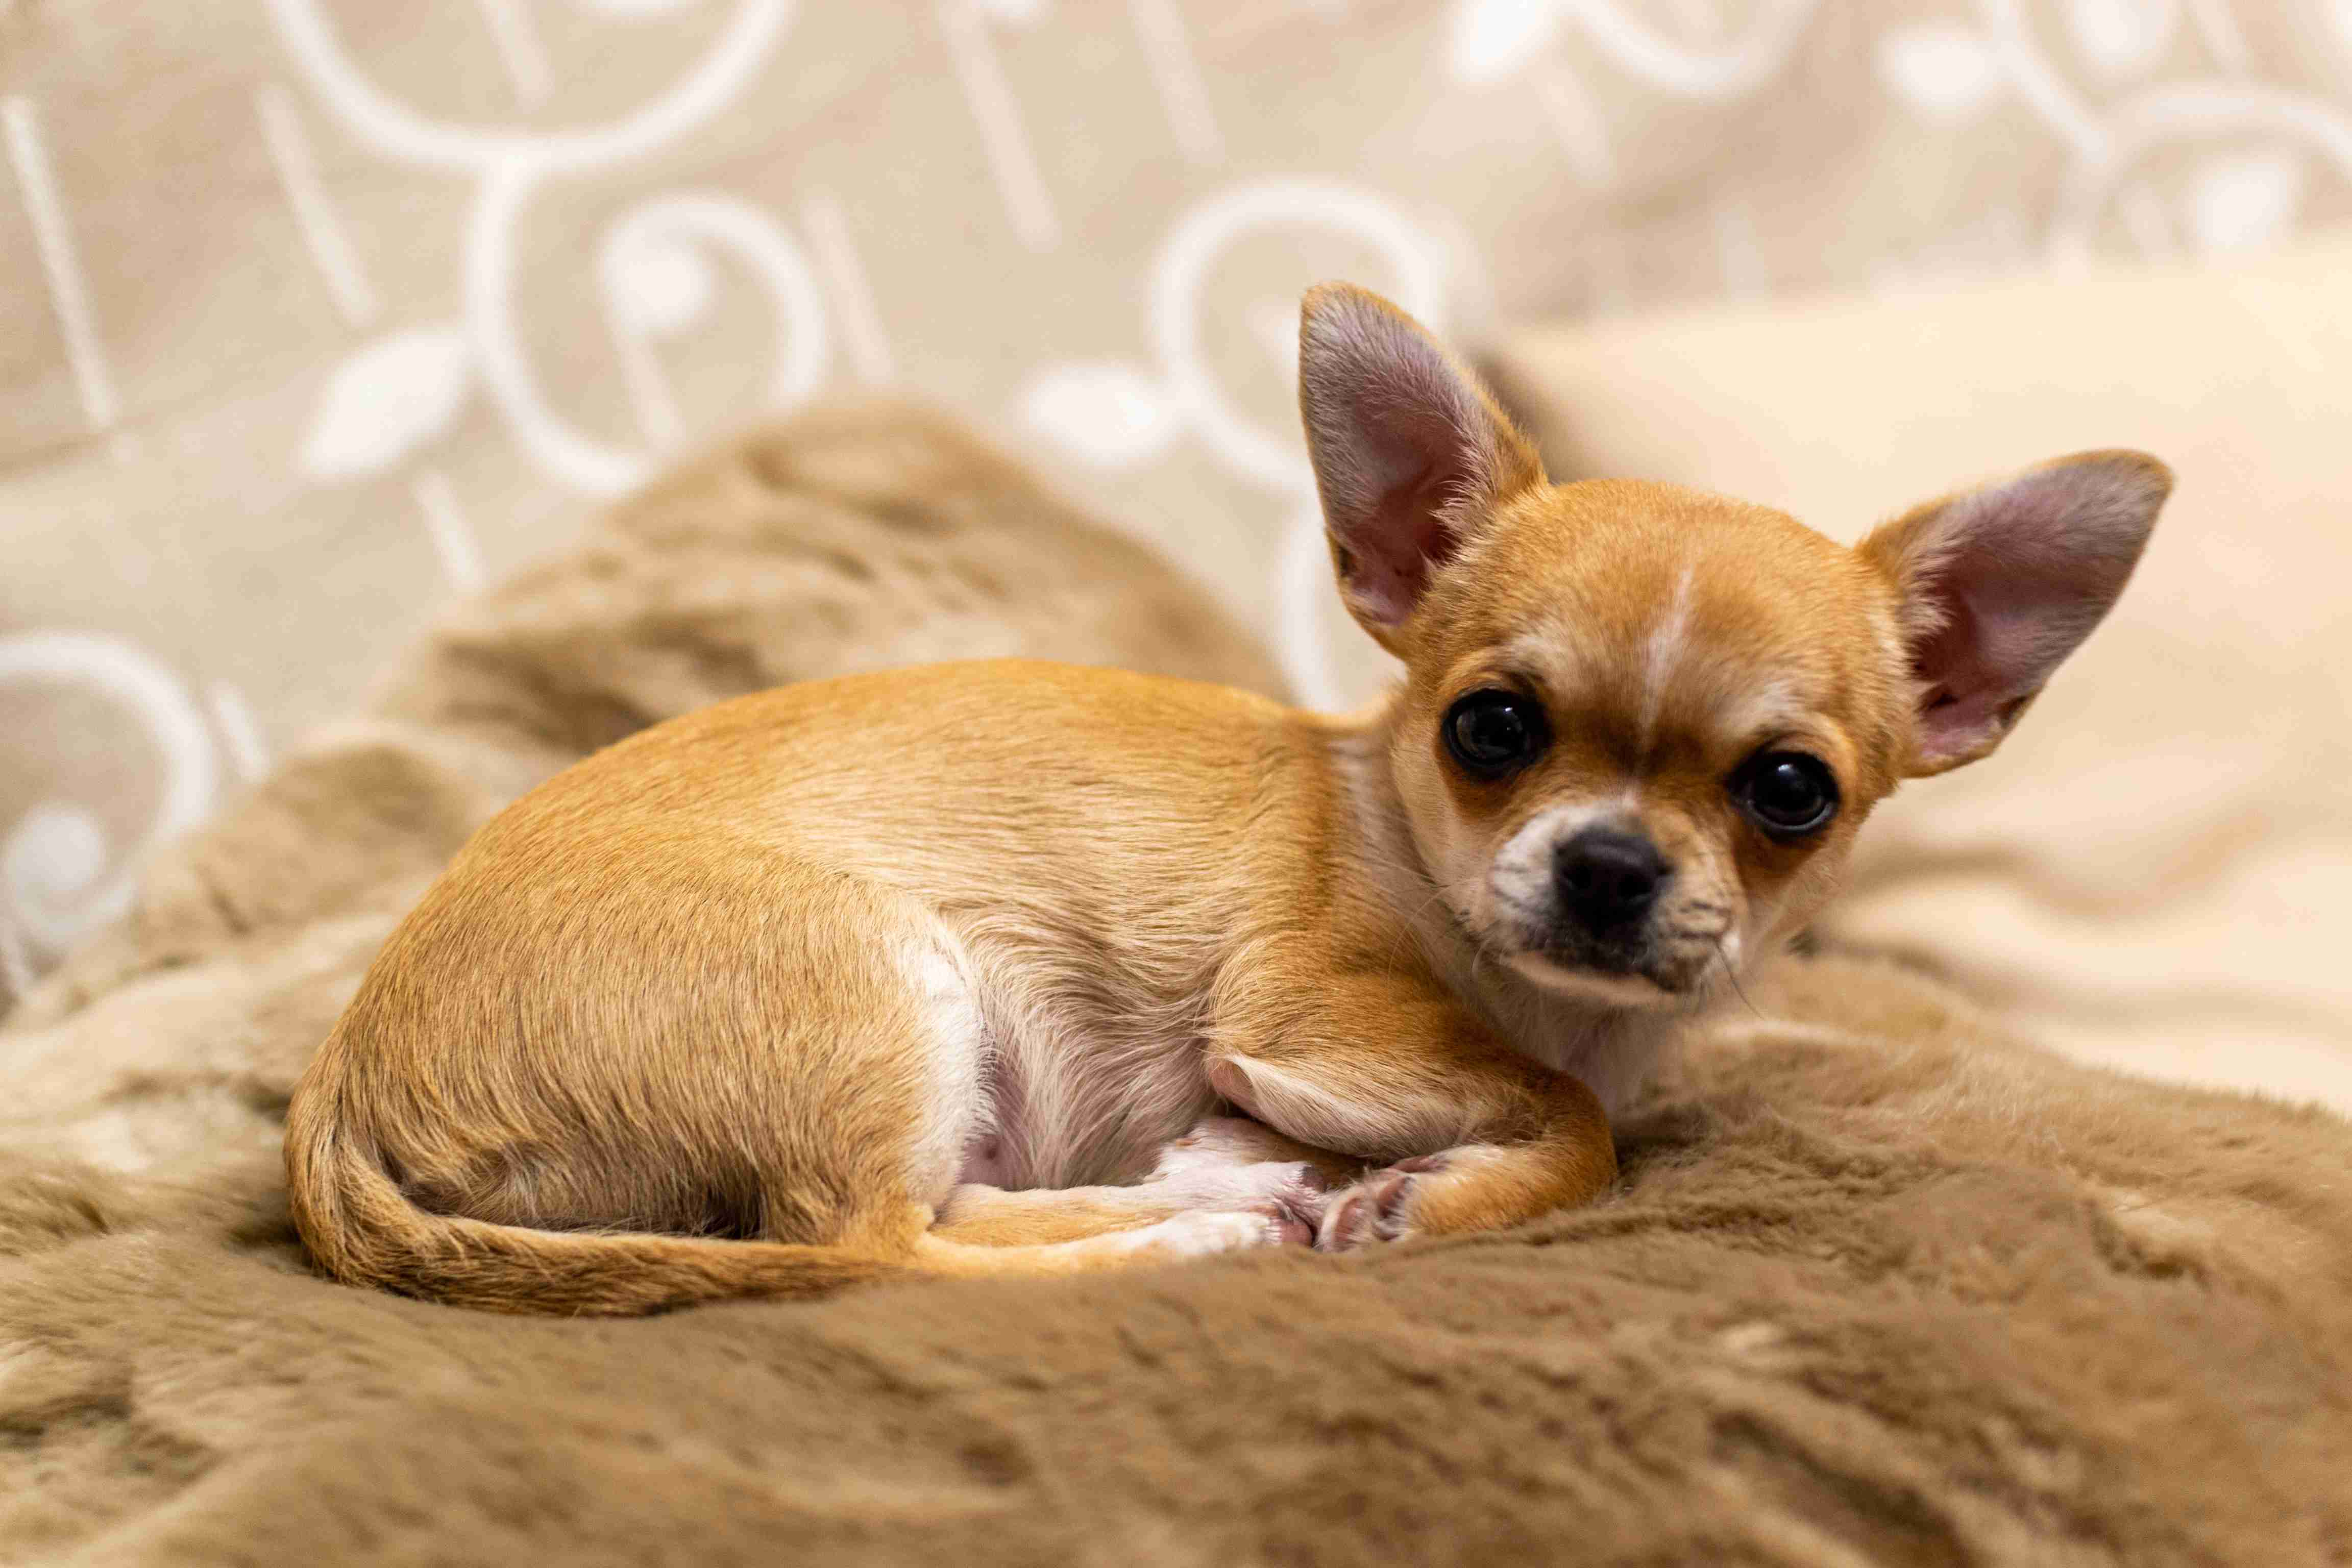 Can Chihuahuas become aggressive towards other pets in the household, such as cats or birds?